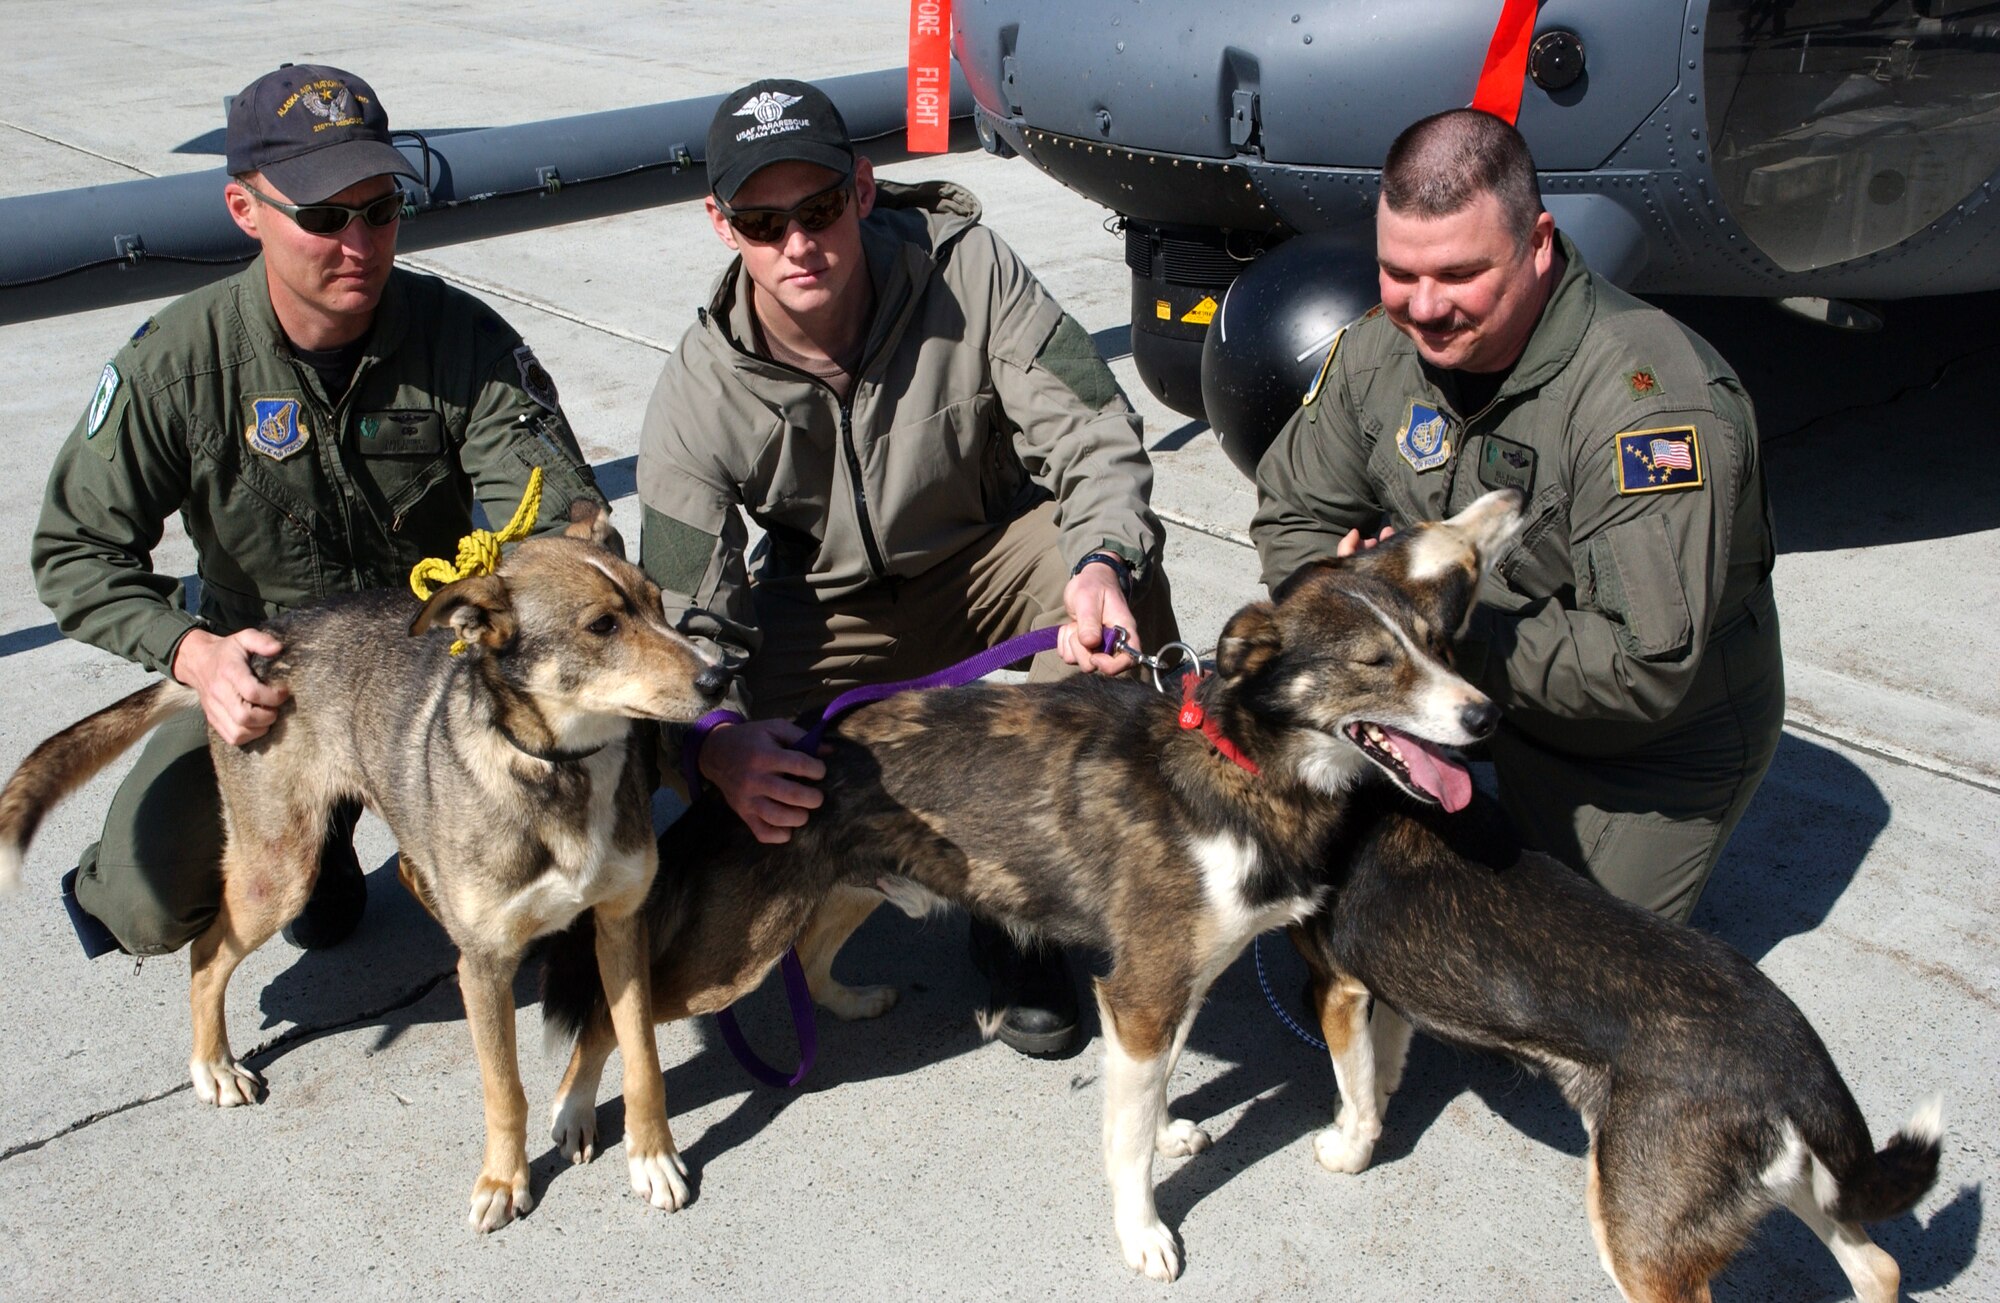 (From left) Lt. Col. Dave Looney, Staff Sgt. Mike Sullivan and Maj. Bill Kupchin accept thanks on Thursday, June 1, 2006, from three of the 89 dogs they rescued during the Yukon Quest International Sled Dog Race in February. The dogs and six mushers were stranded at Eagle Summit during a snowstorm. Colonel Looney and Sergeant Sullivan are with the Alaska Air National Guard's 176th Wing at Kulis ANG Base in Anchorage.  Major Kupchin is commander of Det. 1 of the 210th Rescue Squadron at Eielson Air Force Base, Alaska. (U.S. Air Force photo)